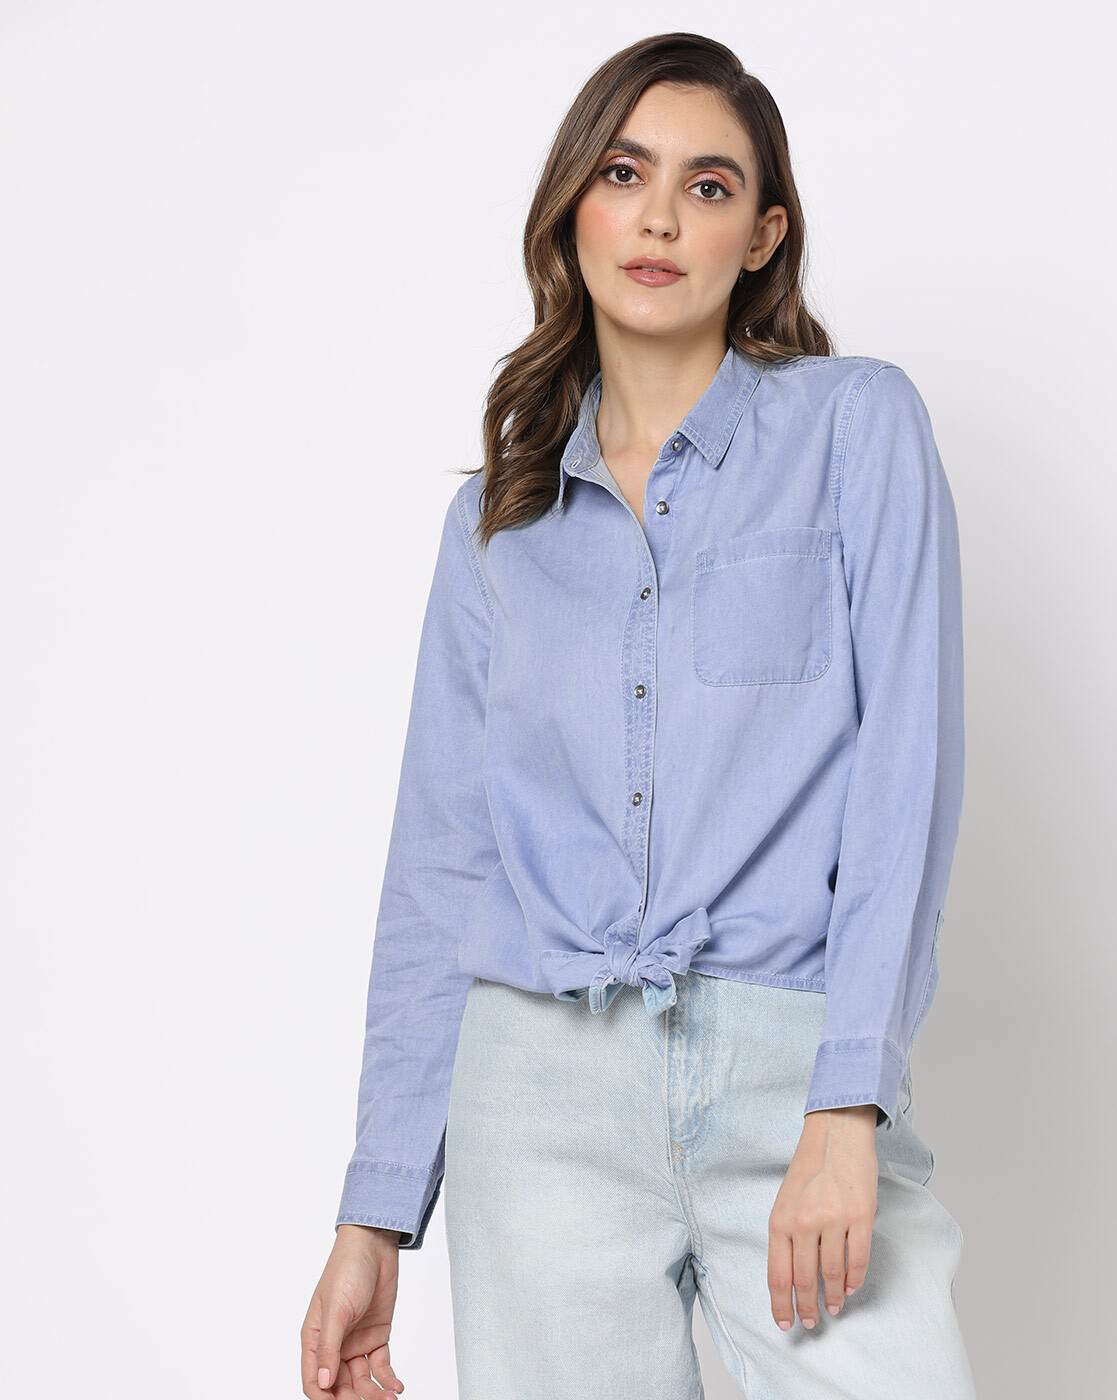 Pepe Jeans Men Solid Casual Blue Shirt - Buy Pepe Jeans Men Solid Casual Blue  Shirt Online at Best Prices in India | Flipkart.com